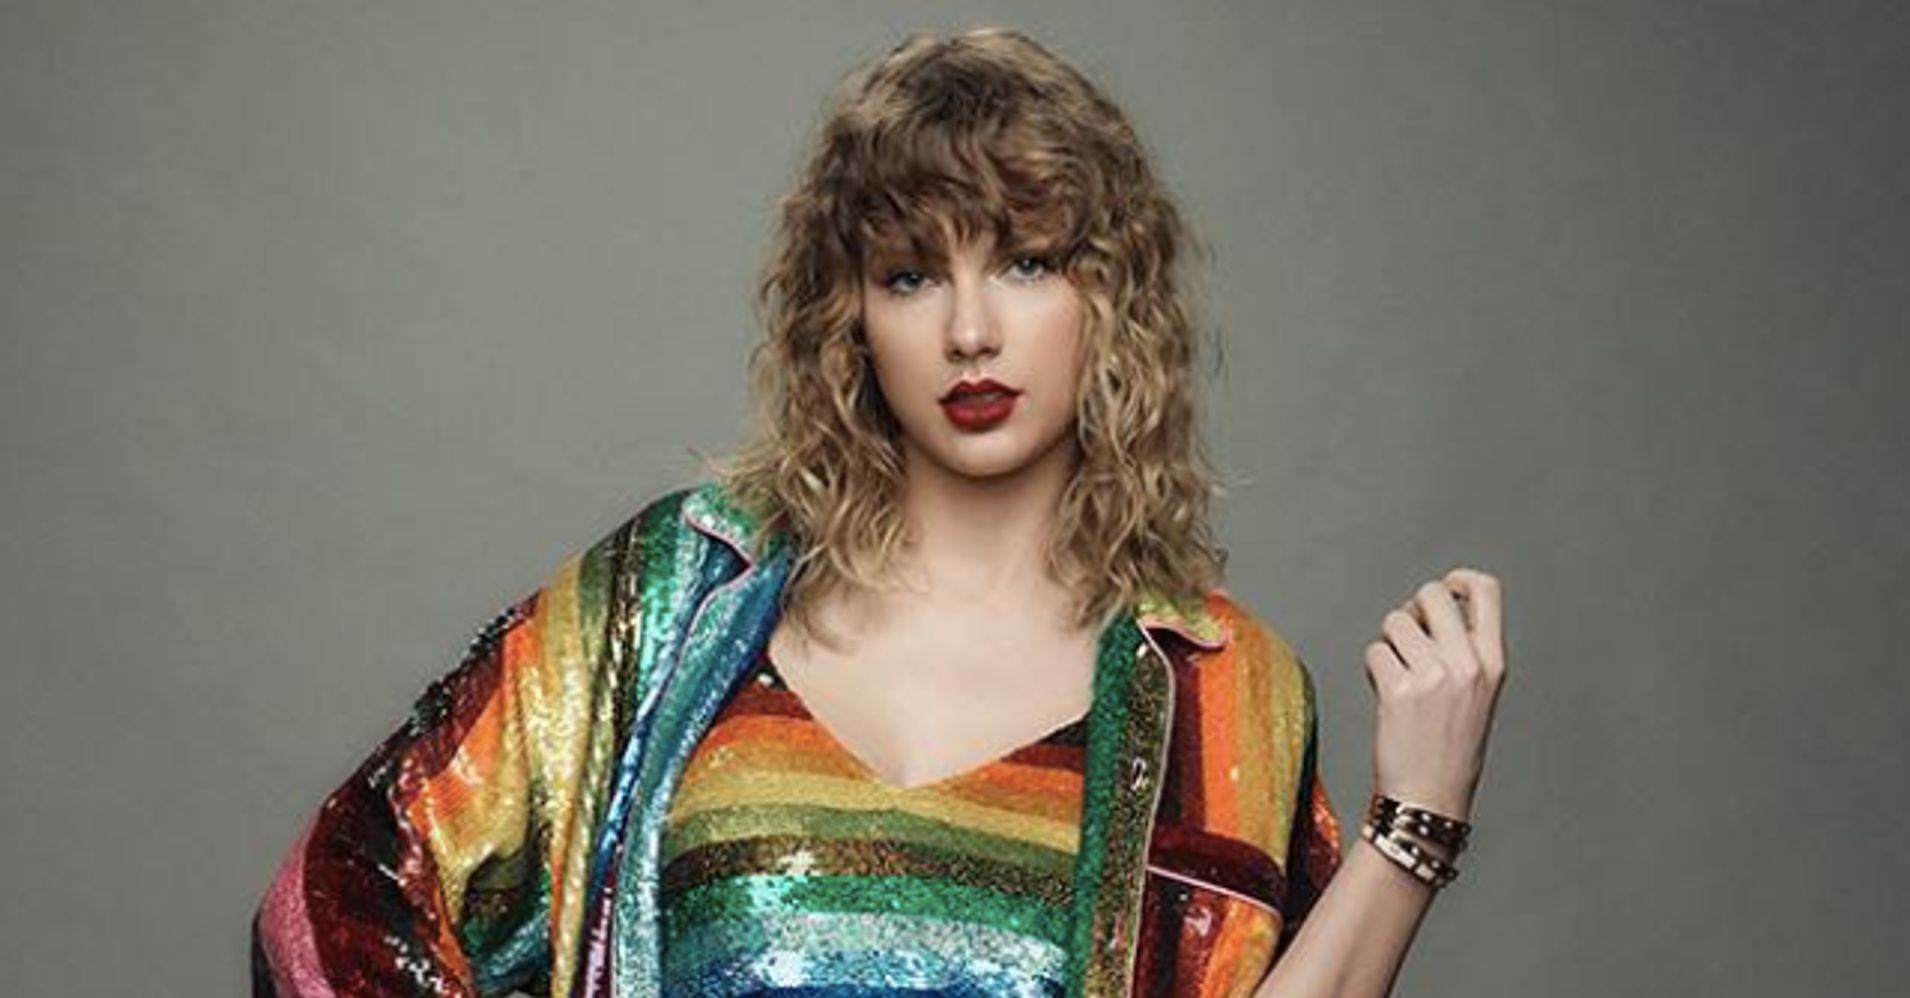 Taylor Swift's New Album 'Reputation' Is Messy, But In A Good Way | HuffPost1910 x 1000